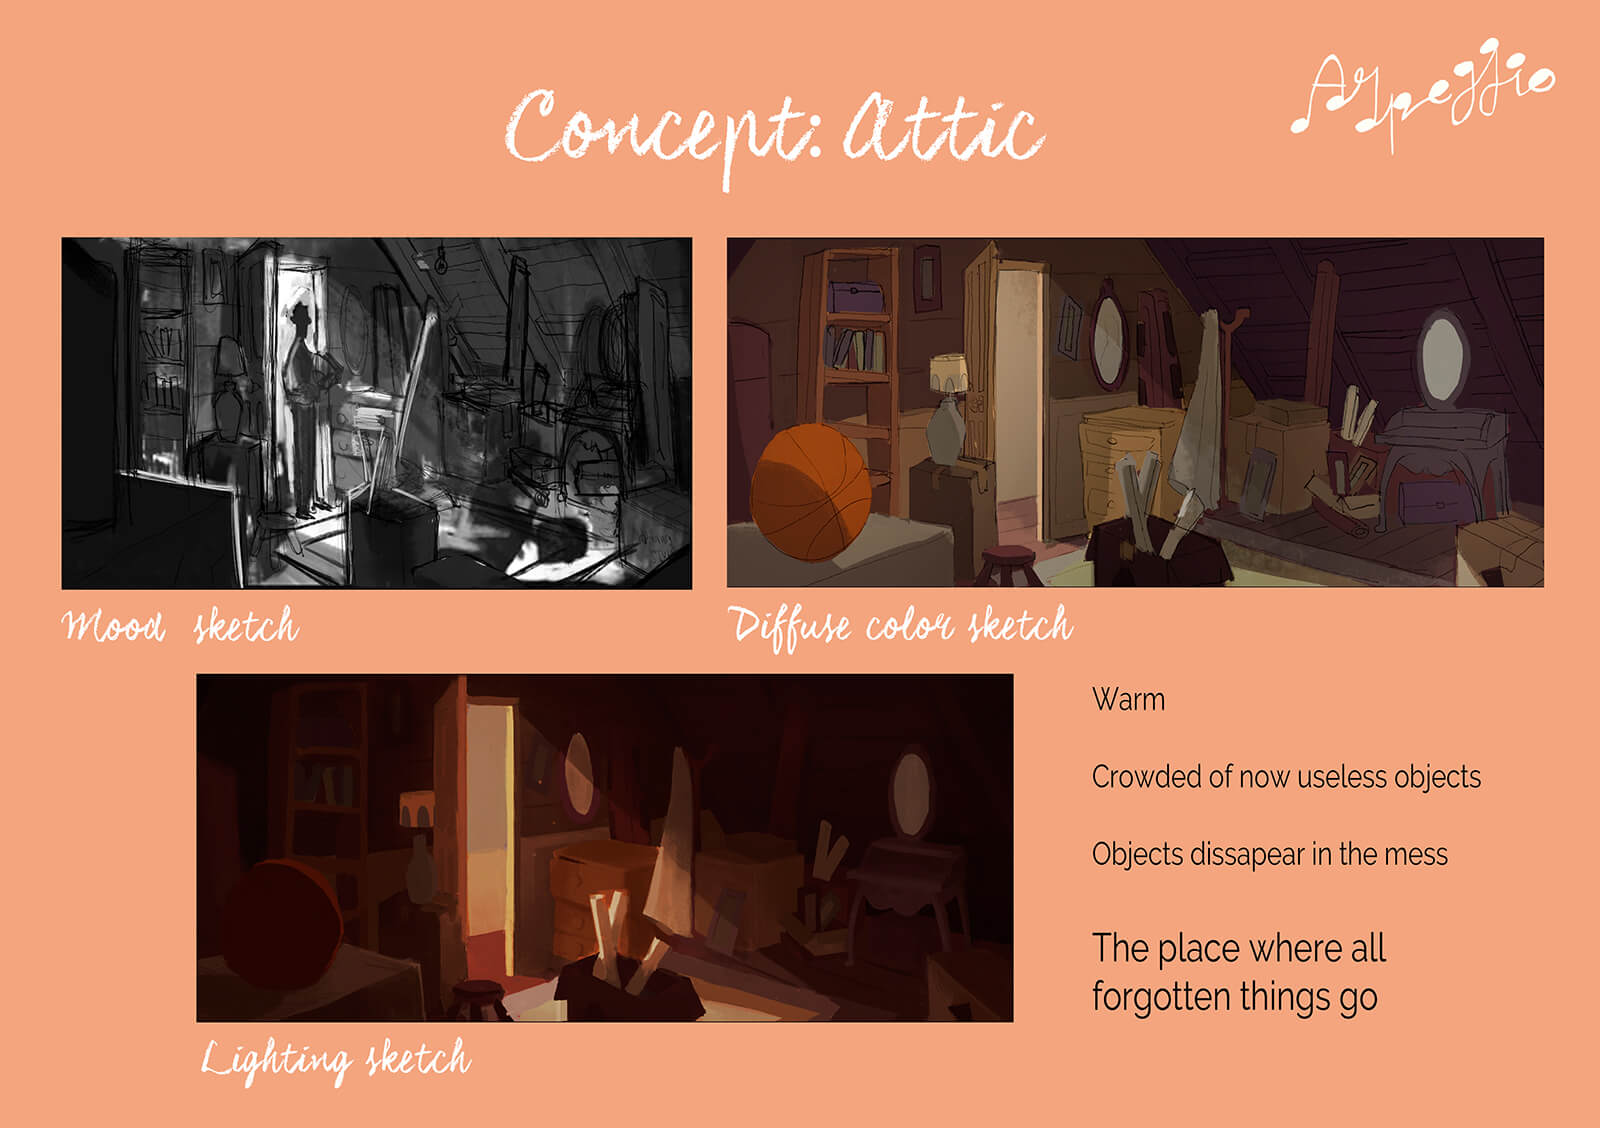 Concept art for the attic setting in the film Arpeggio, including mood sketch, diffuse color sketch, and lighting sketch